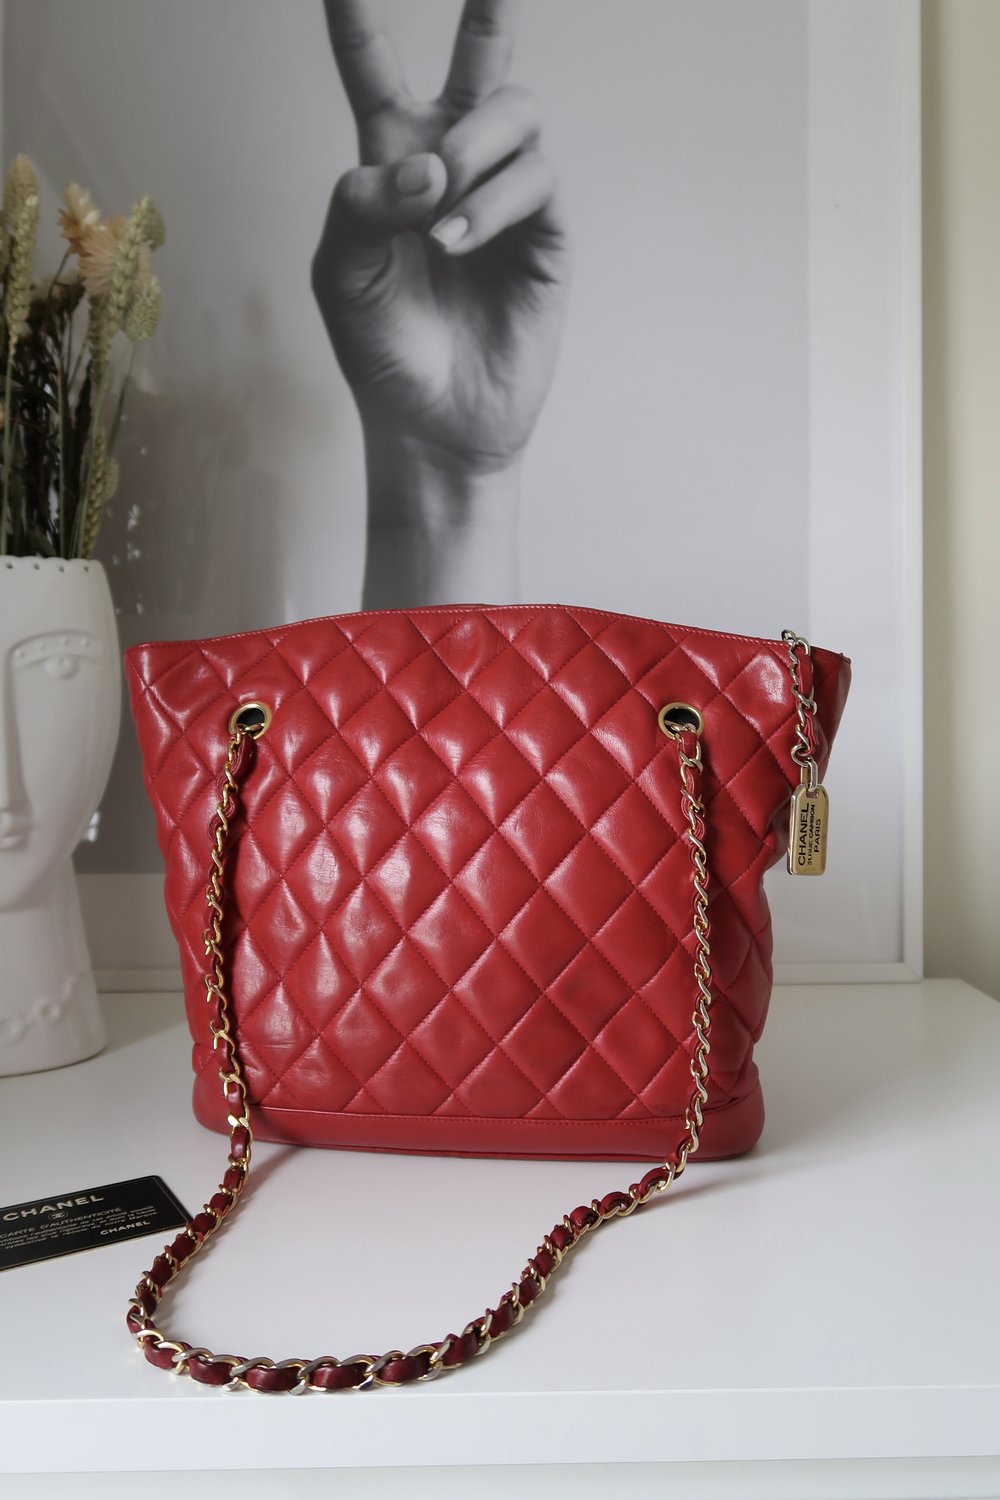 Vintage Chanel Red Quilted Tote Bag (1989-1991 series) — Blaise Ruby Loves